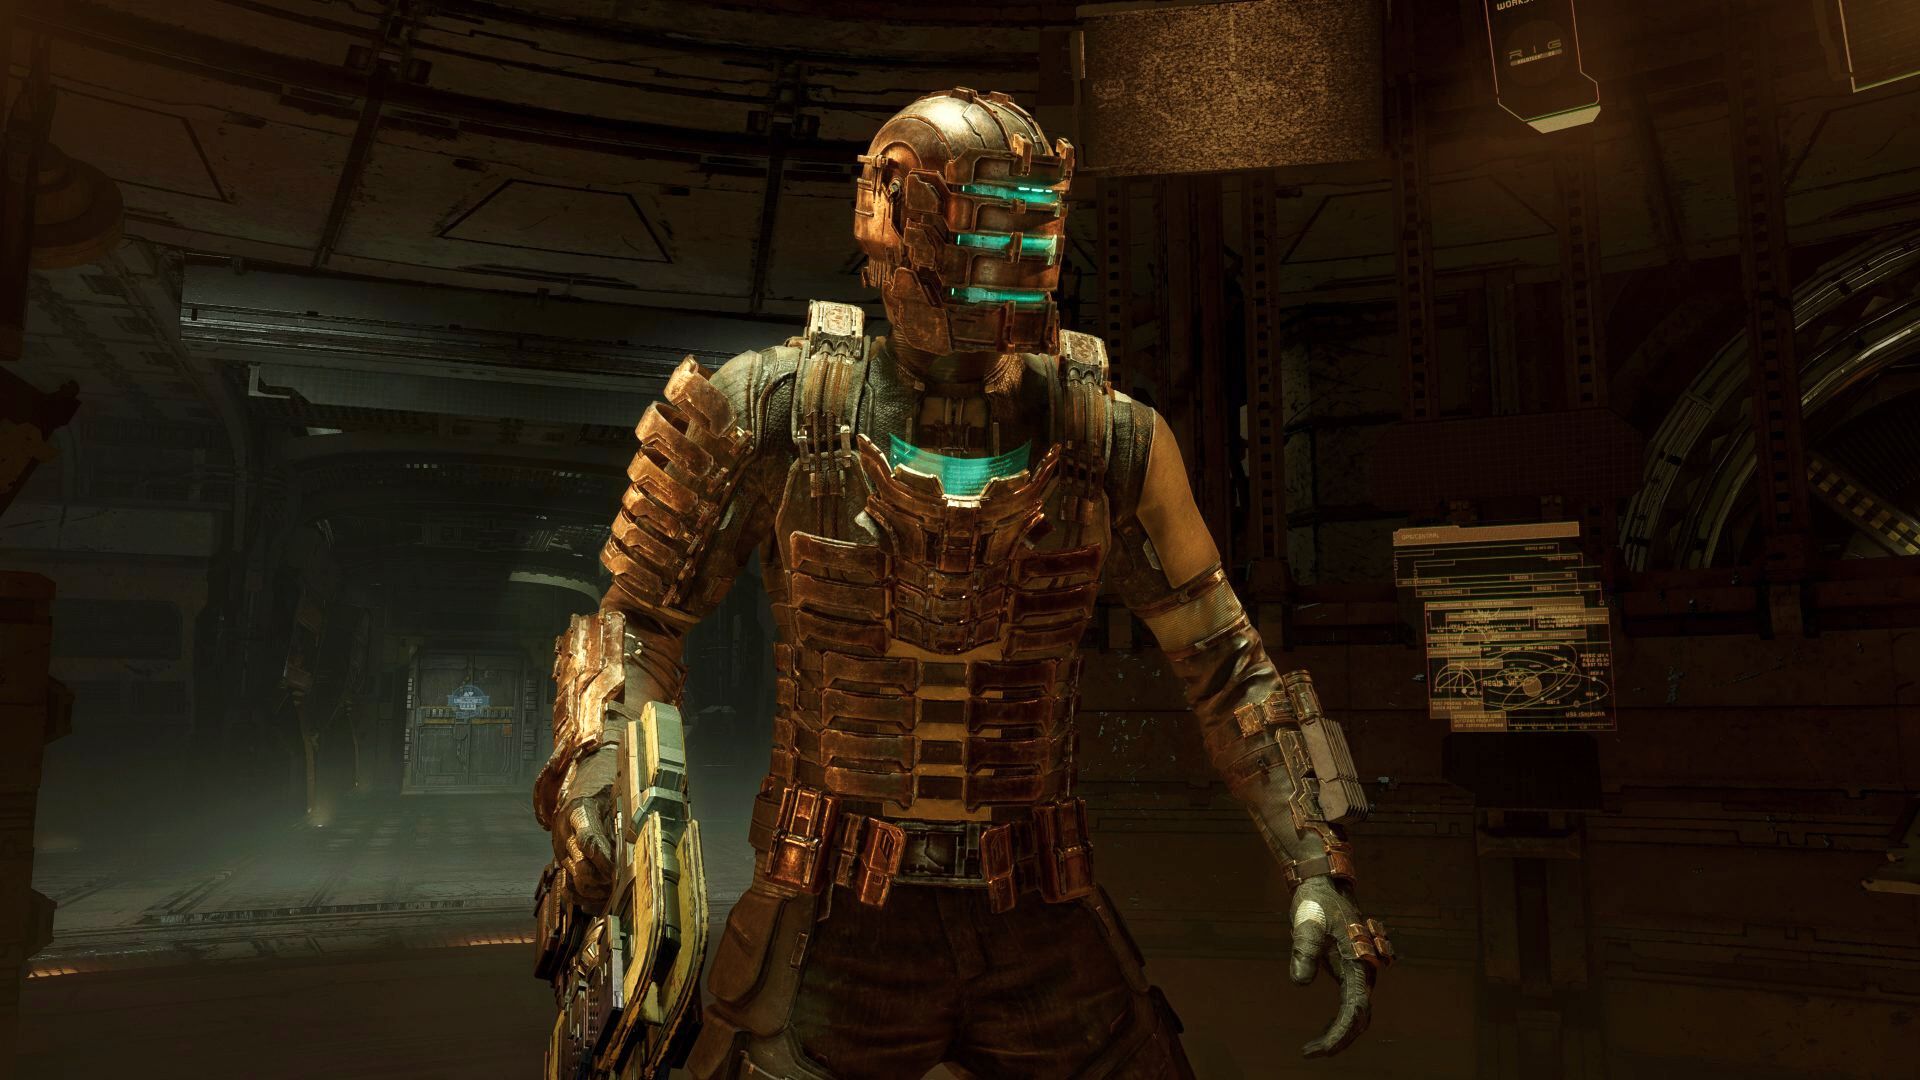 Dead Space Remake composer says EA should “skip ahead” to DS4